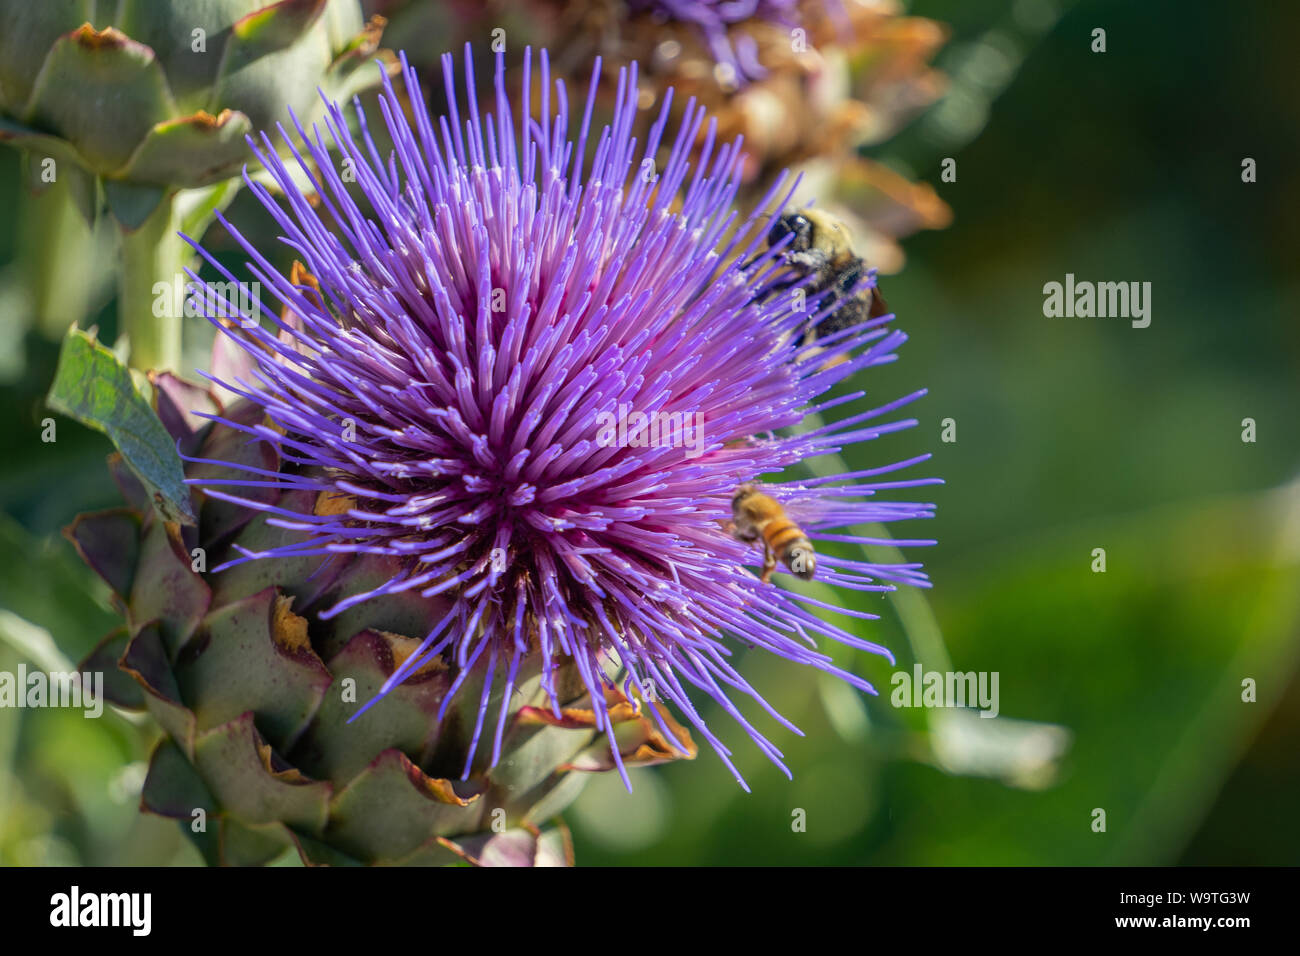 The thistle proved to be irresistible to the bees. They loved it! Stock Photo